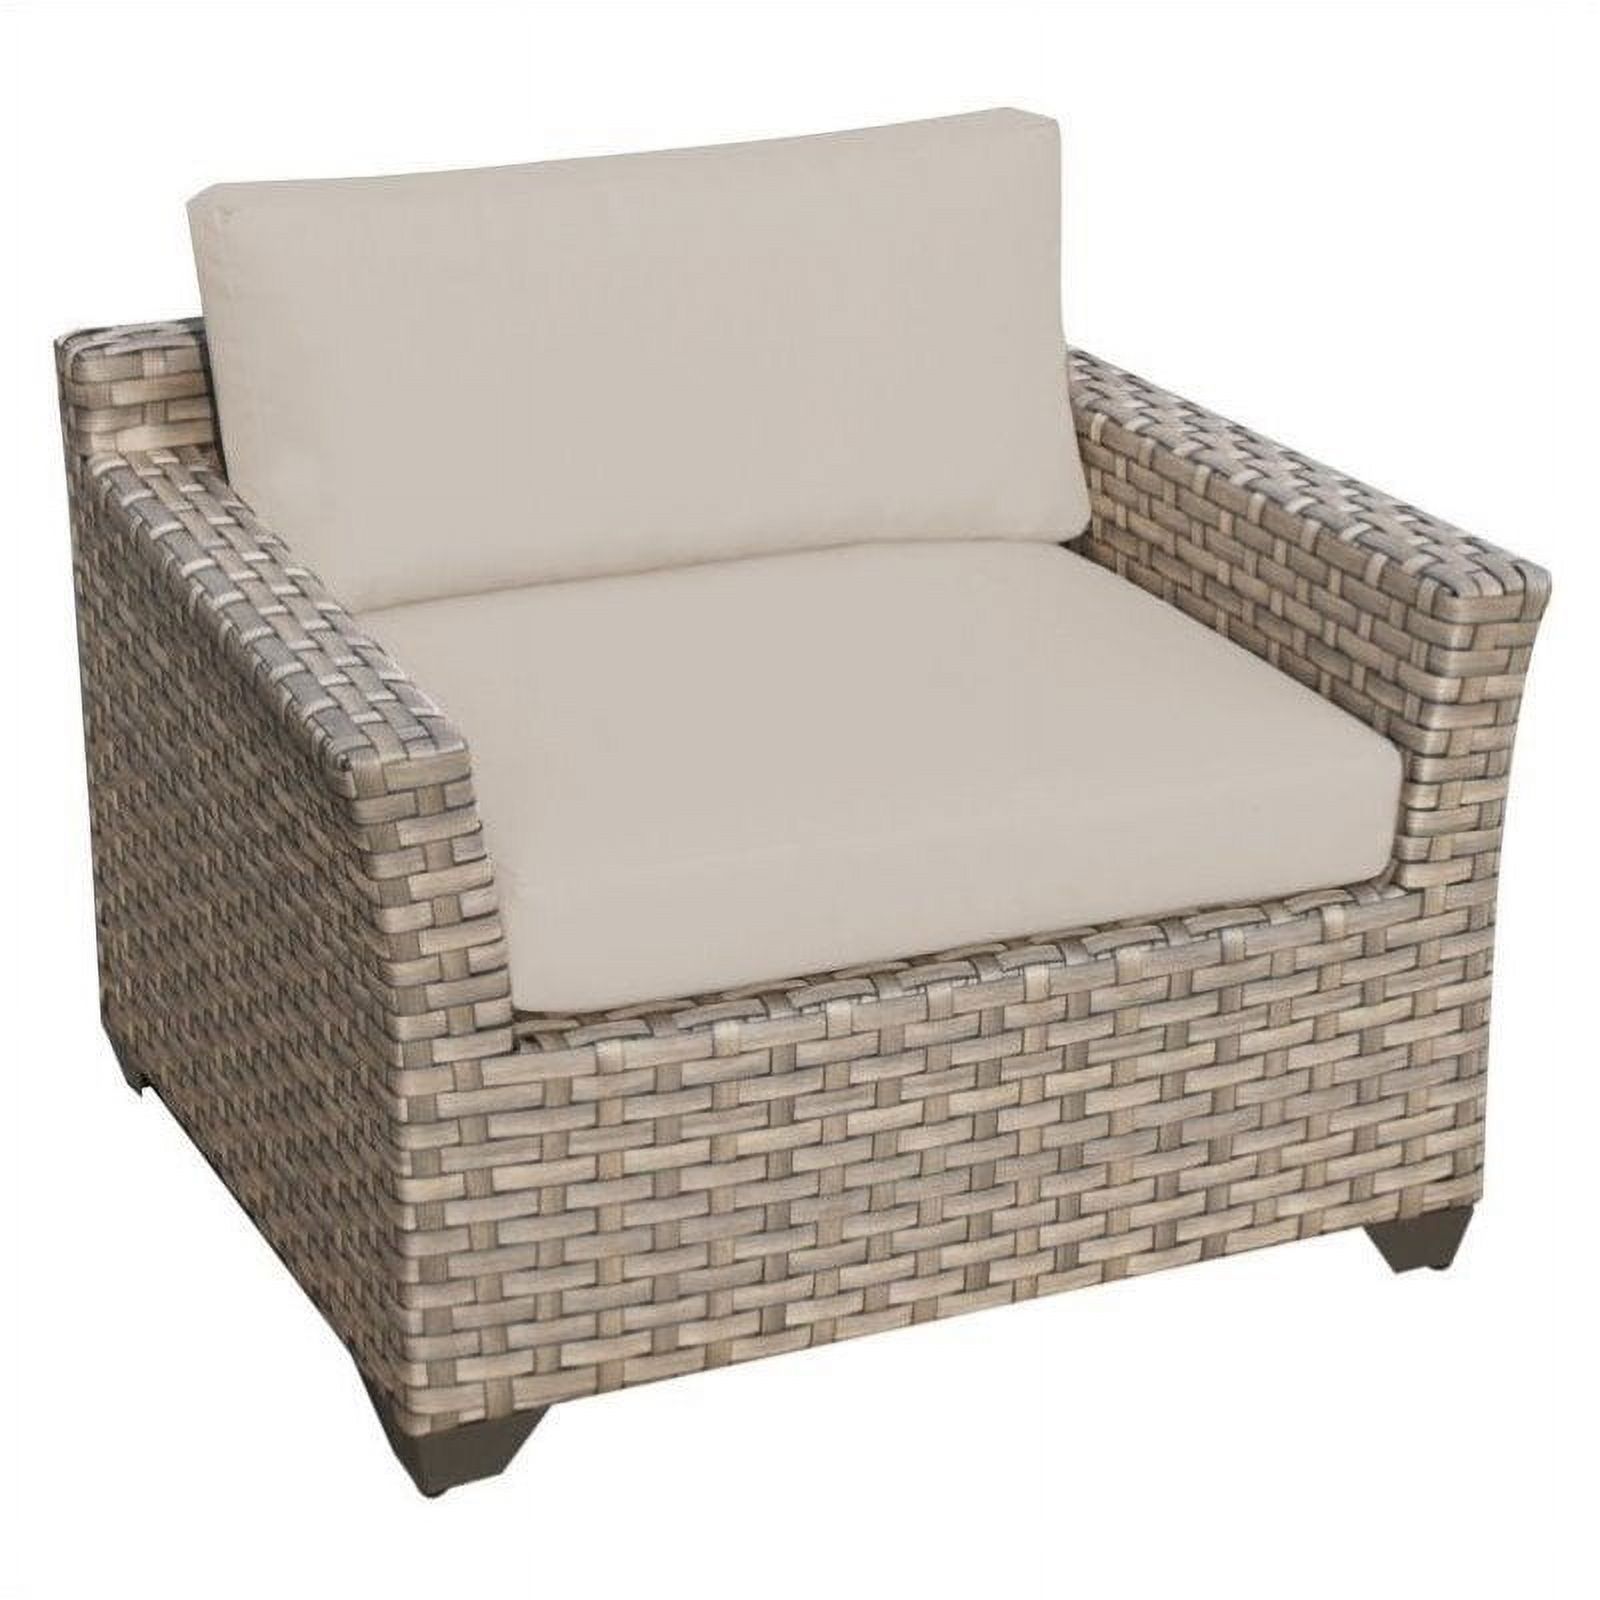 3 Piece Patio Furniture Set with Wickered Set of 2 Arm Chairs and Coffee Table in Summer Fog - image 4 of 4